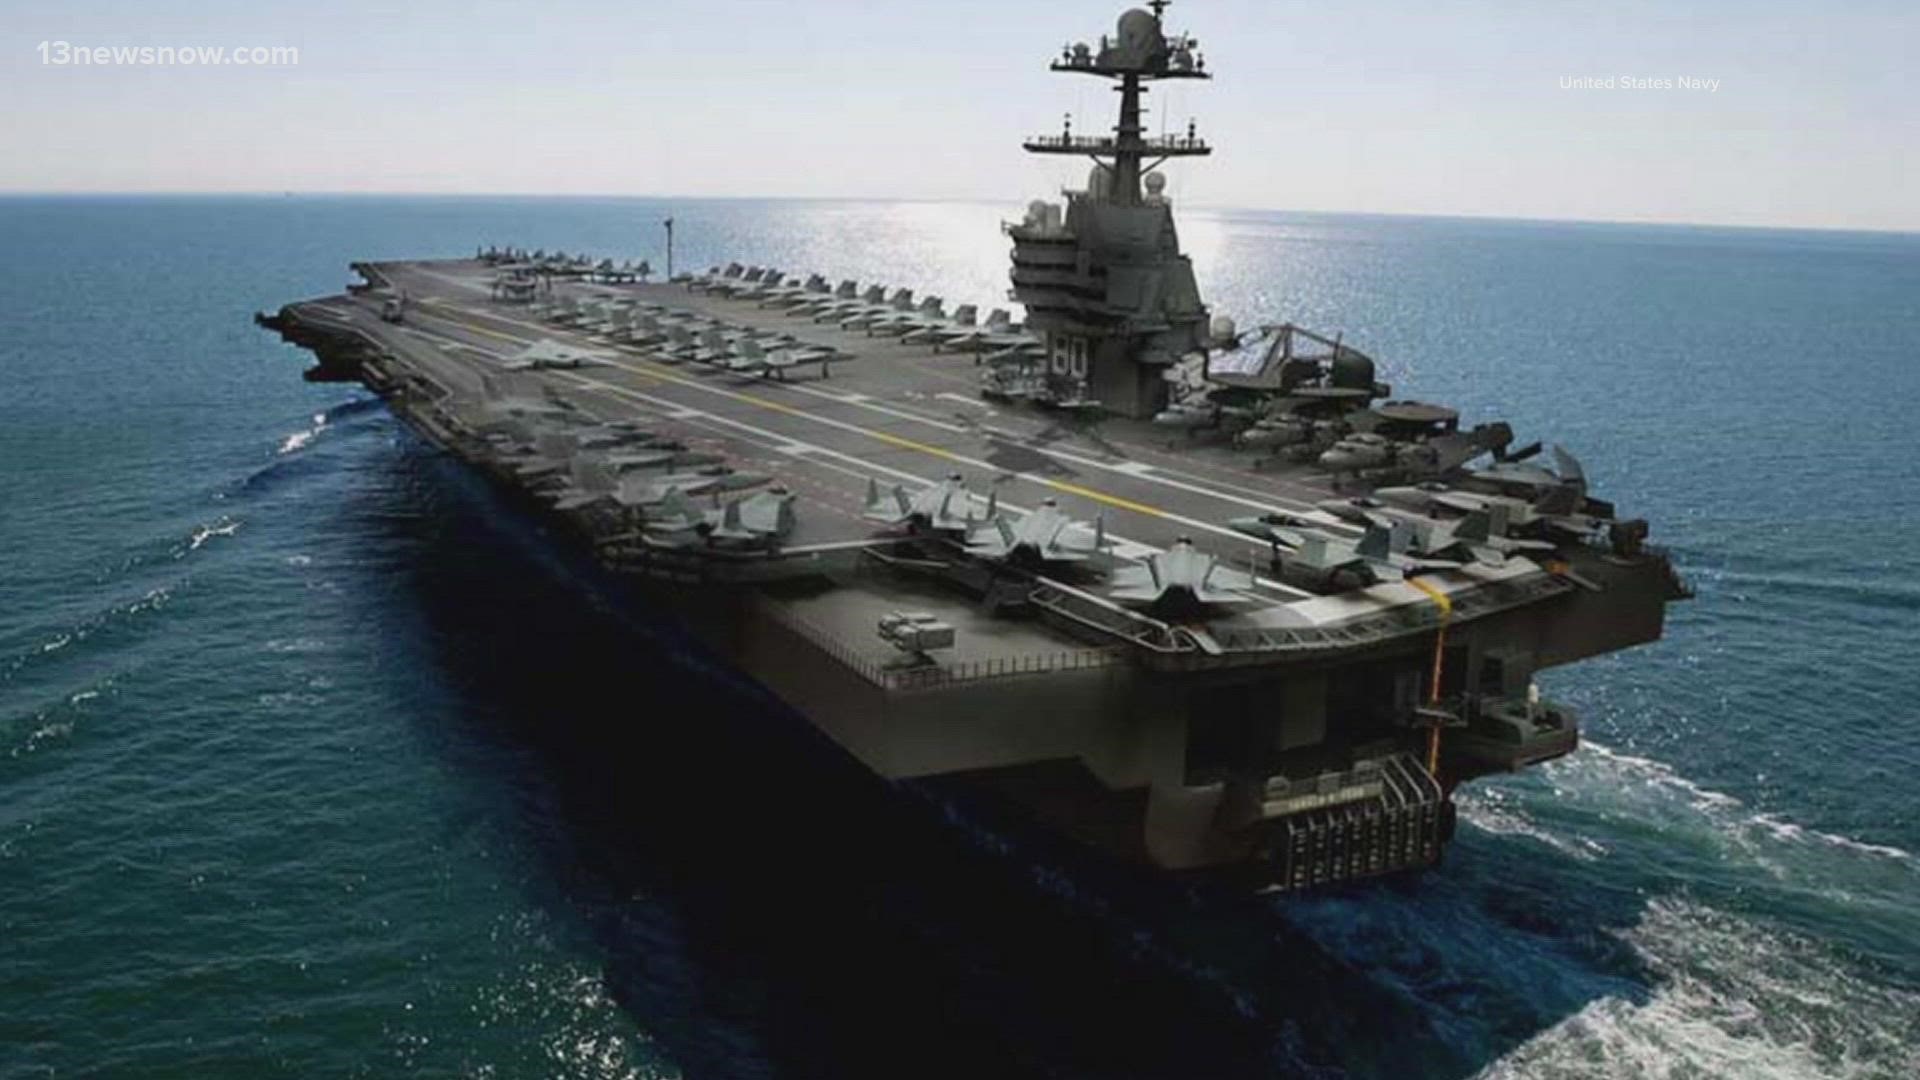 The construction of the $12 billion aircraft carrier is said to be 15% complete, with delivery to Navy scheduled for 2028.